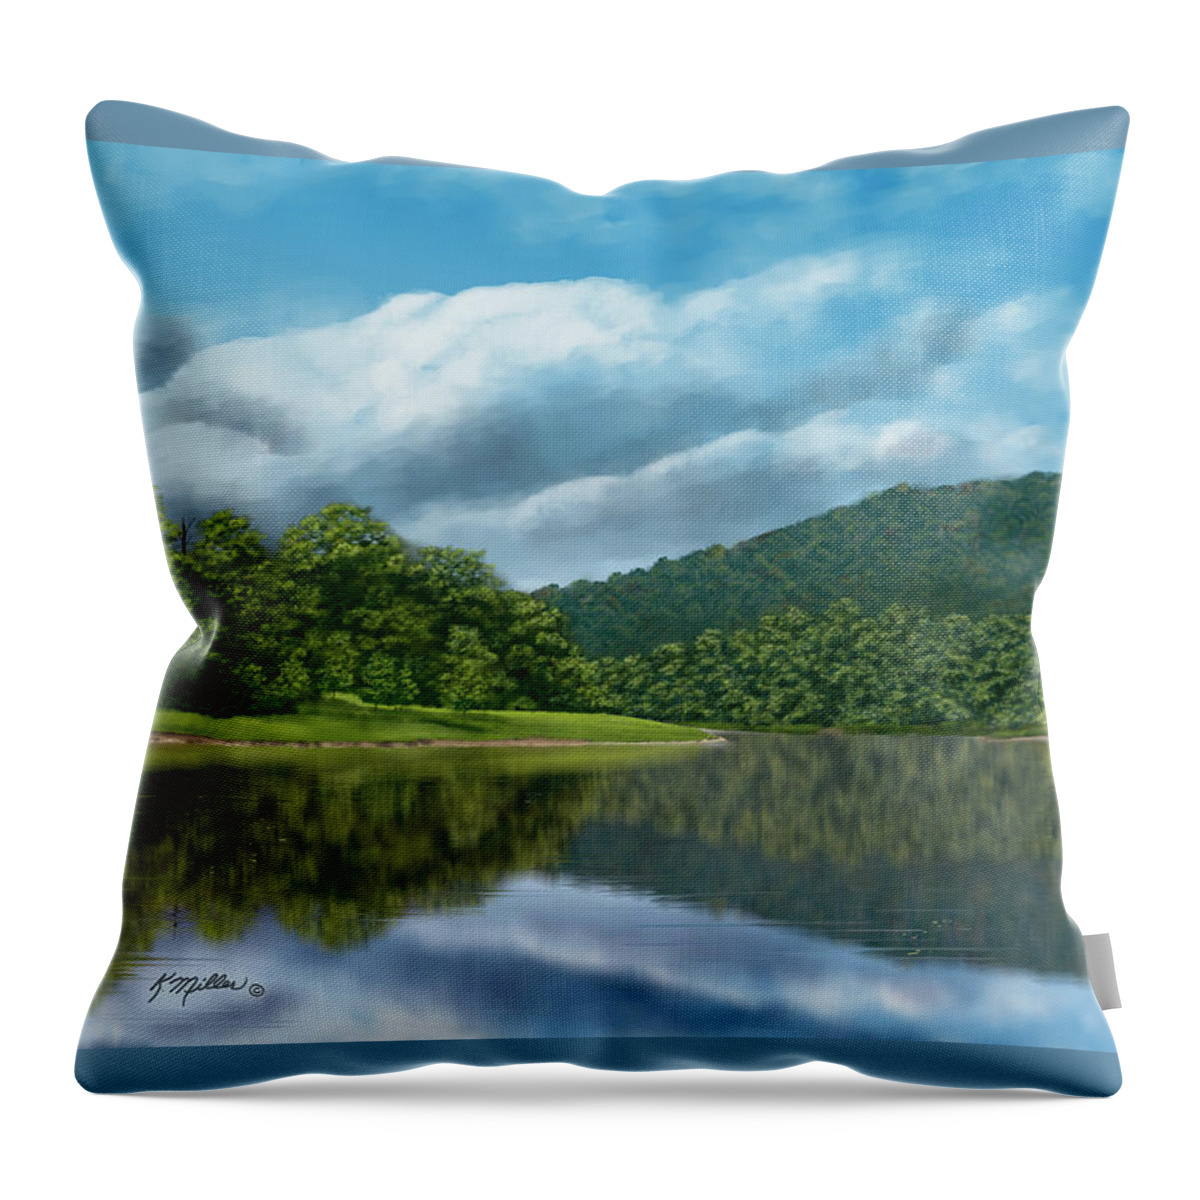 River Throw Pillow featuring the painting Riberbank by Kathie Miller